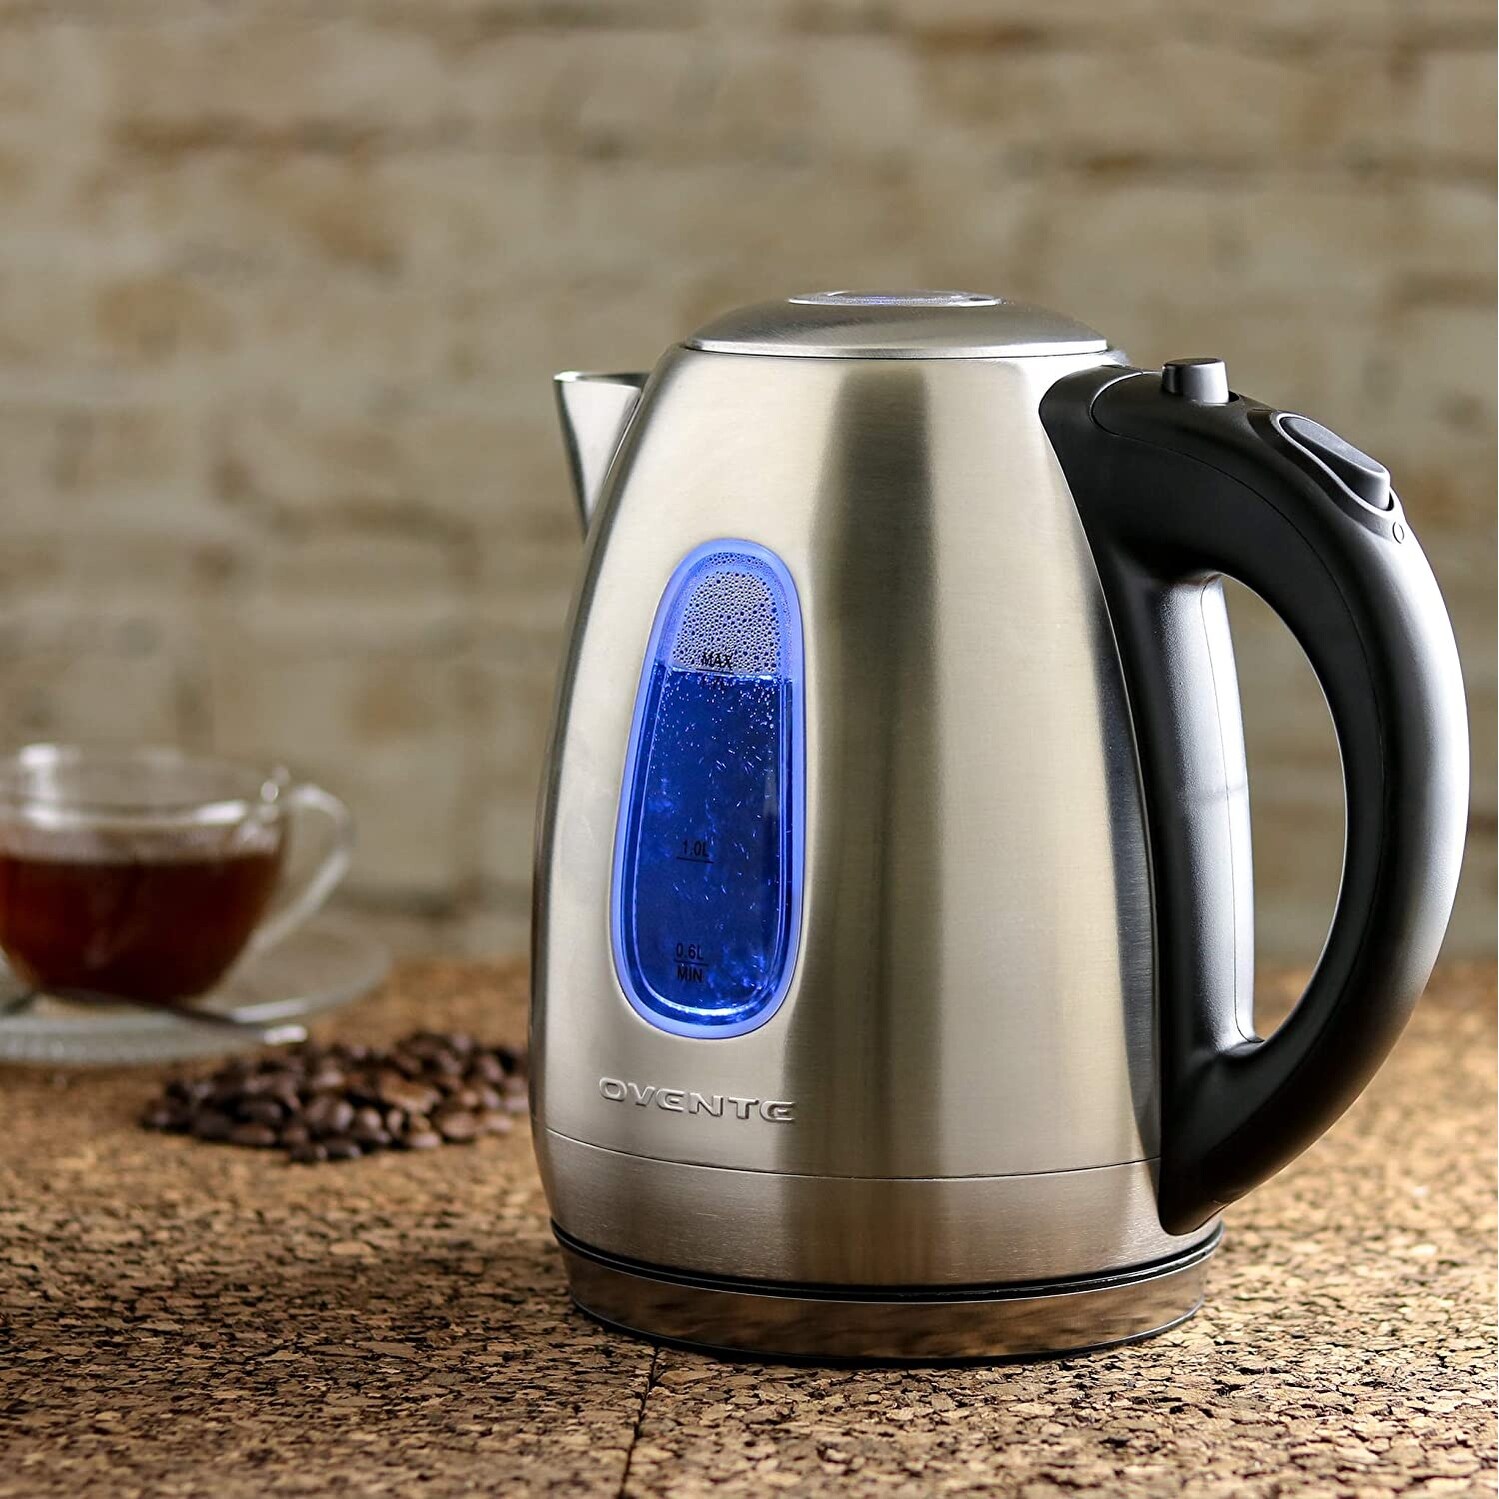 https://ak1.ostkcdn.com/images/products/is/images/direct/422a6bf60d0696f695e899224b0277b632947eb5/Ovente-Electric-Kettle-1.7-Liter-with-LED-Indicator-Light-%28KS96-Series%29.jpg